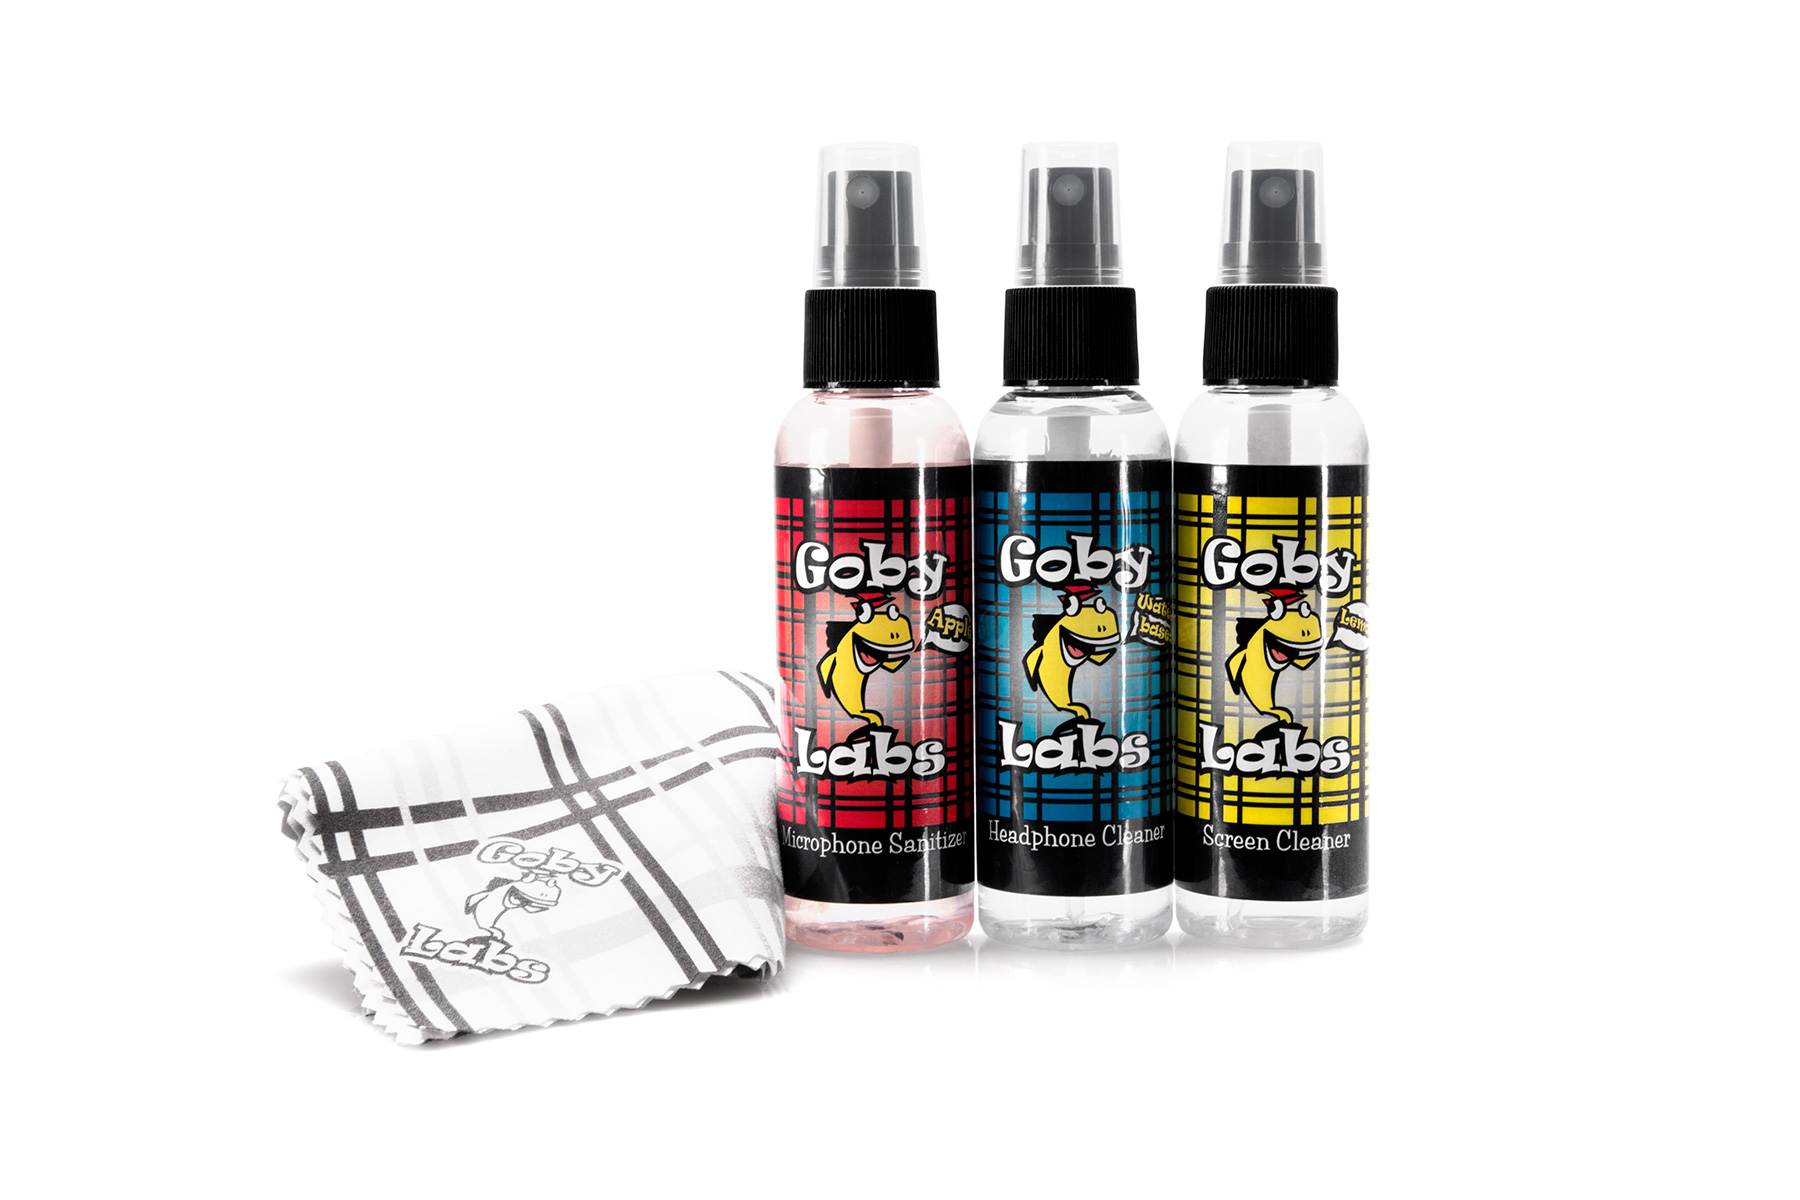 Photos - Other Sound & Hi-Fi Goby GLEK-302 Goby Labs Equipment Care Kit